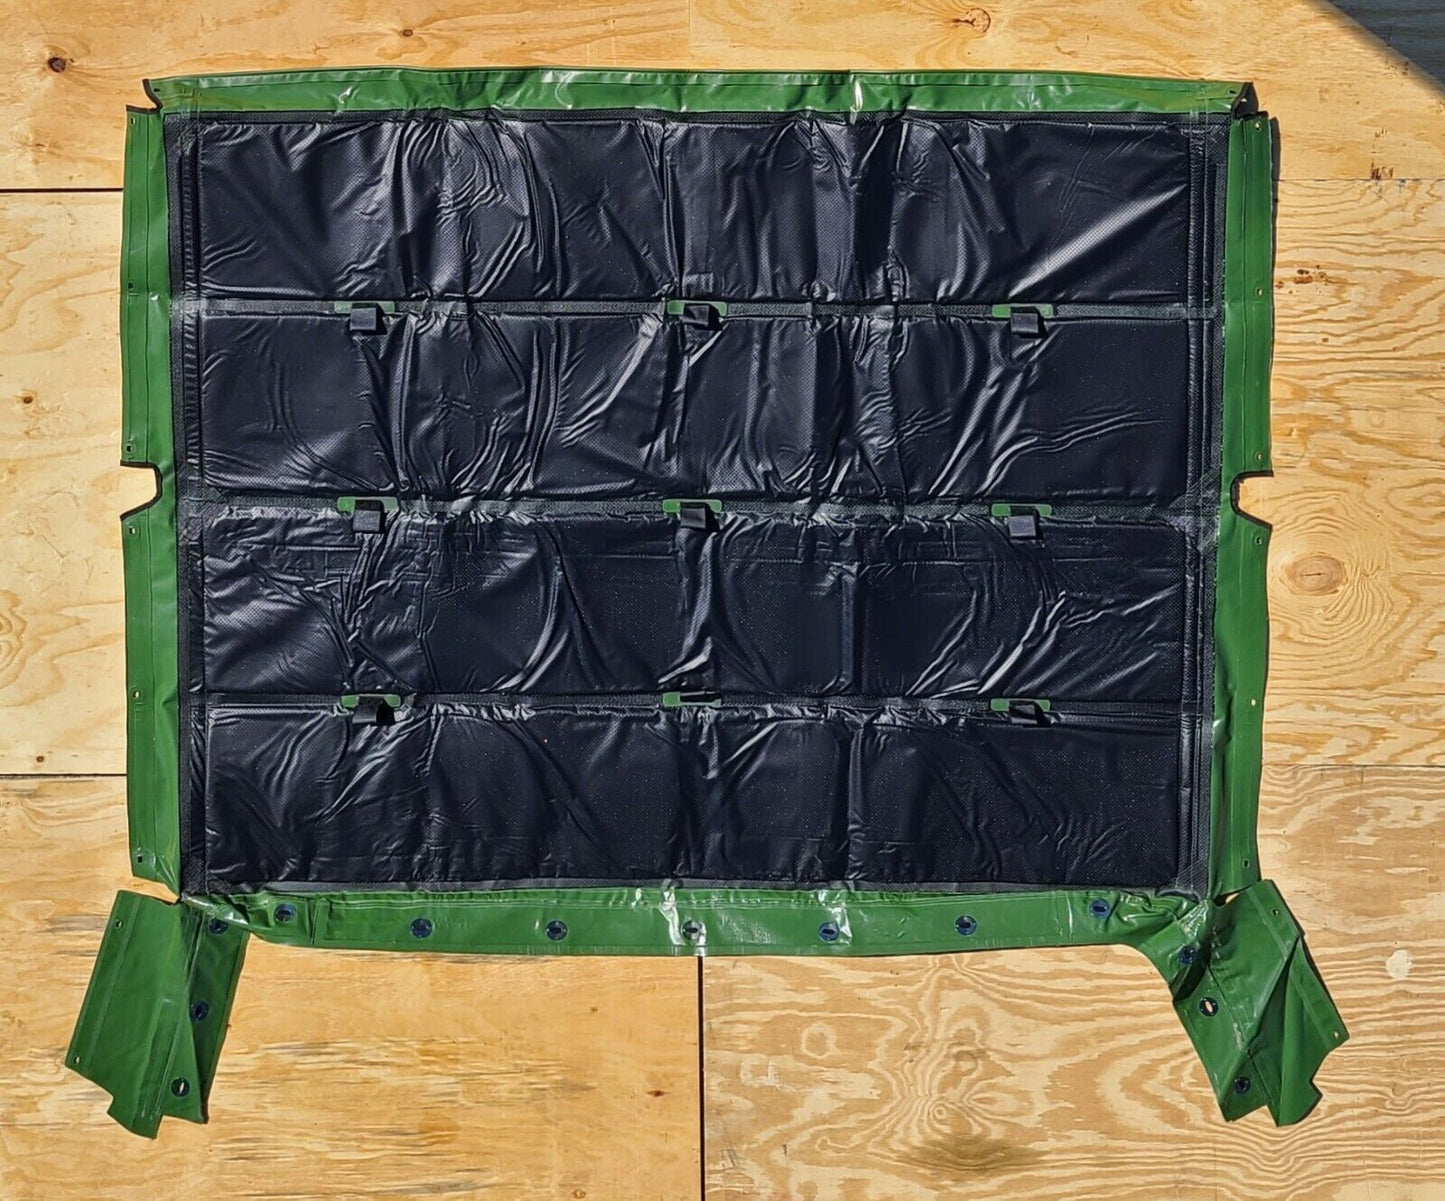 HMMWV 4 MAN  SOFT TOP Selection, Doors, Roof, Curtain Ect  BLACK GREEN